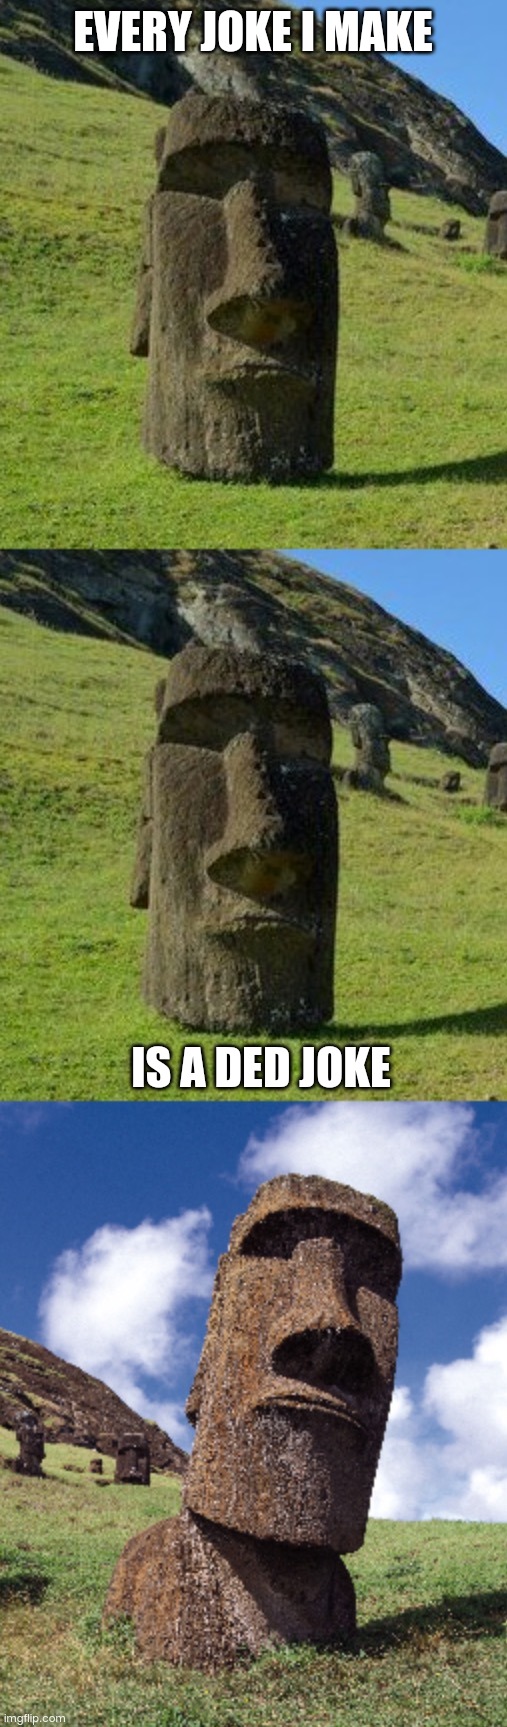 ded joke | EVERY JOKE I MAKE; IS A DED JOKE | image tagged in bad pun moai,dad joke,puns,ded,stop reading the tags,you have been eternally cursed for reading the tags | made w/ Imgflip meme maker